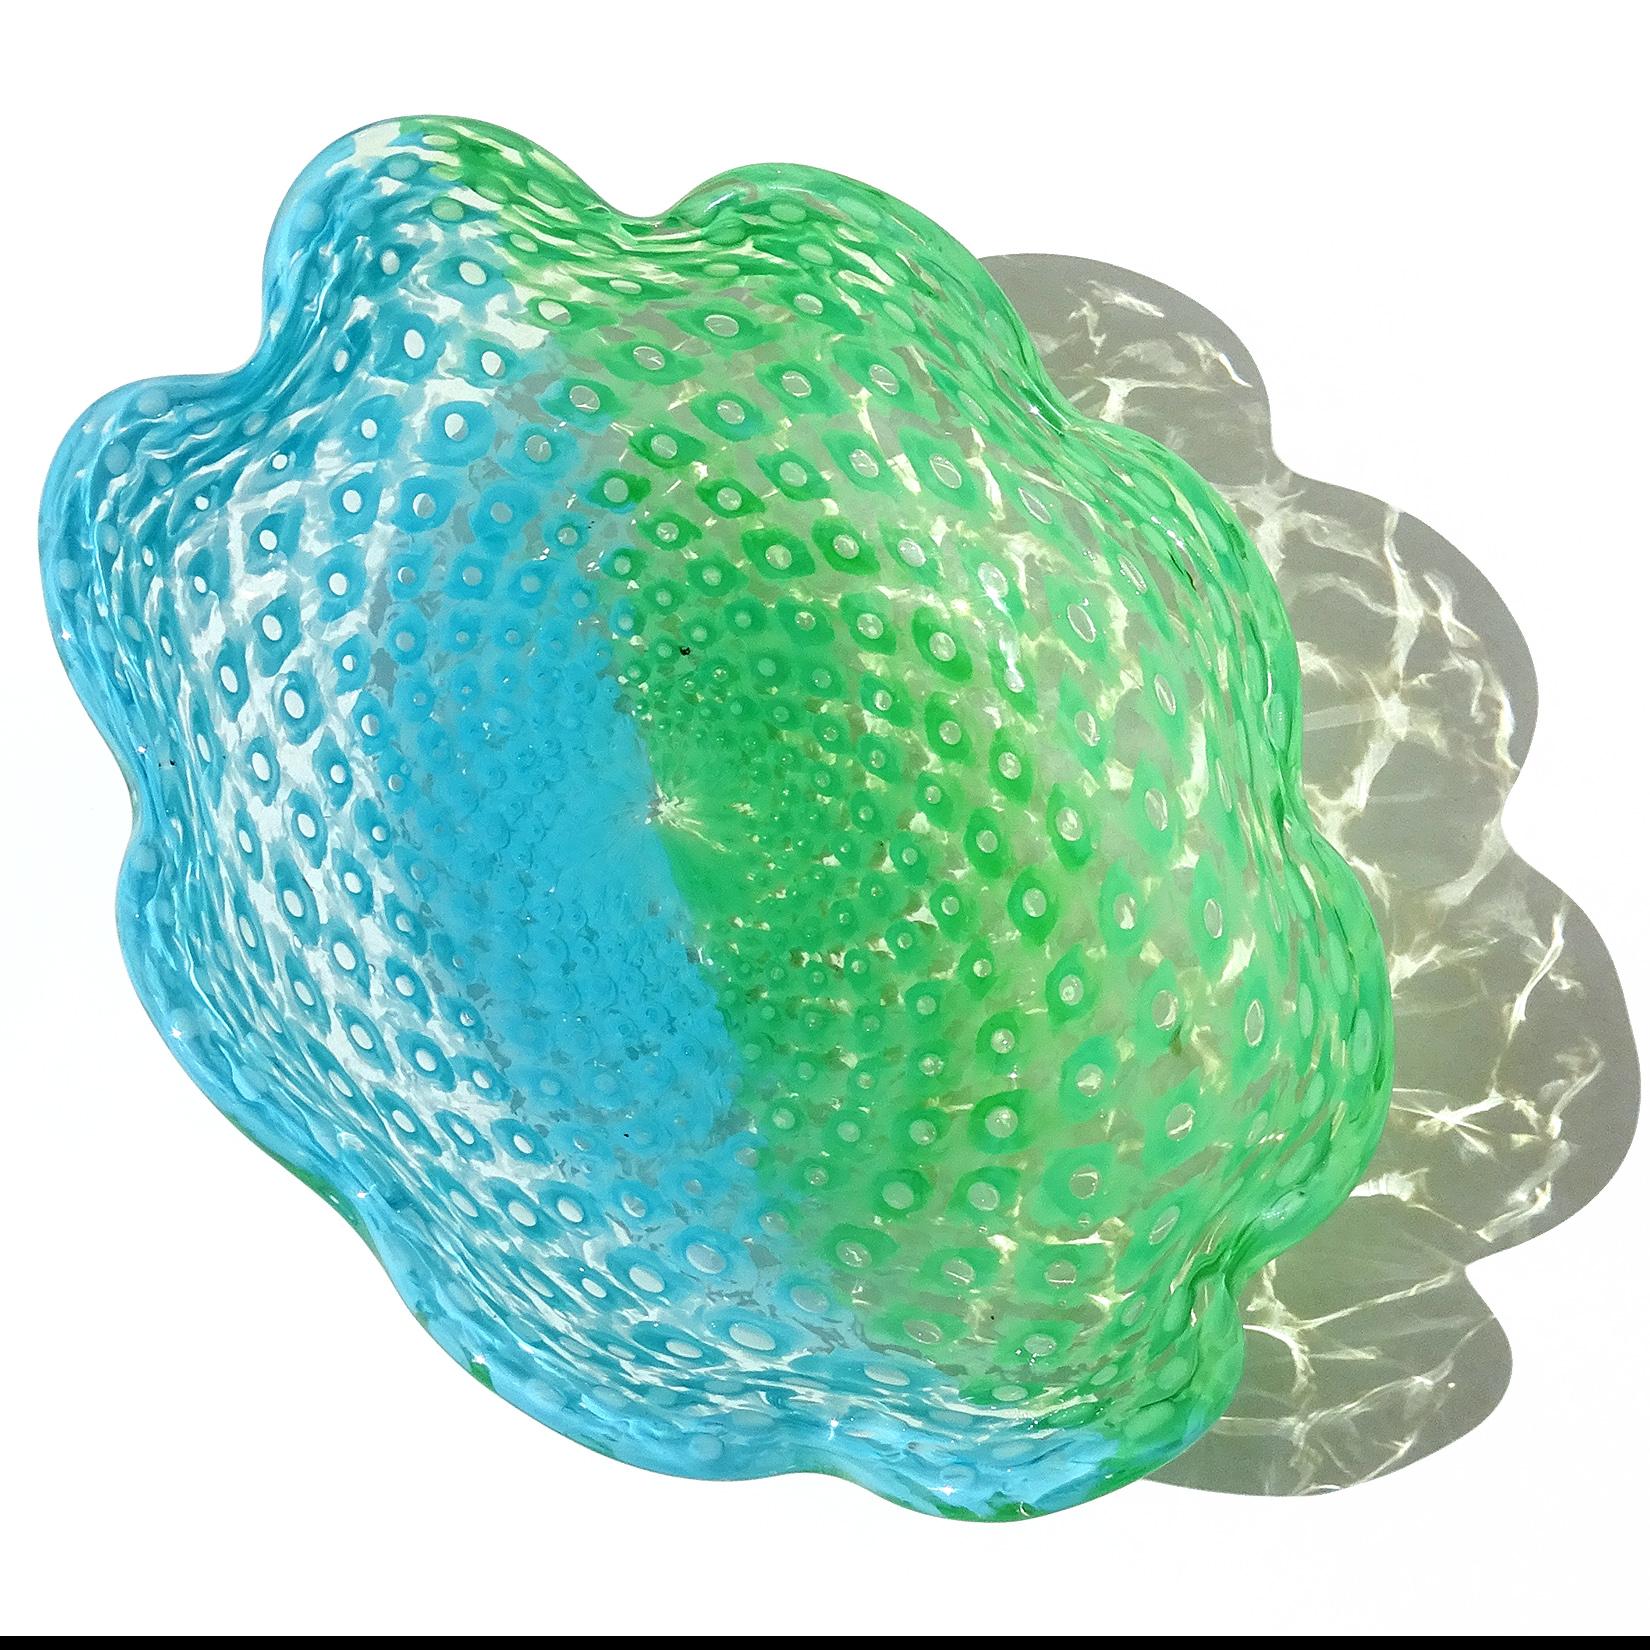 Fratelli Toso Murano Sky Blue Green Bubbles Italian Art Glass Centerpiece Bowl In Good Condition For Sale In Kissimmee, FL